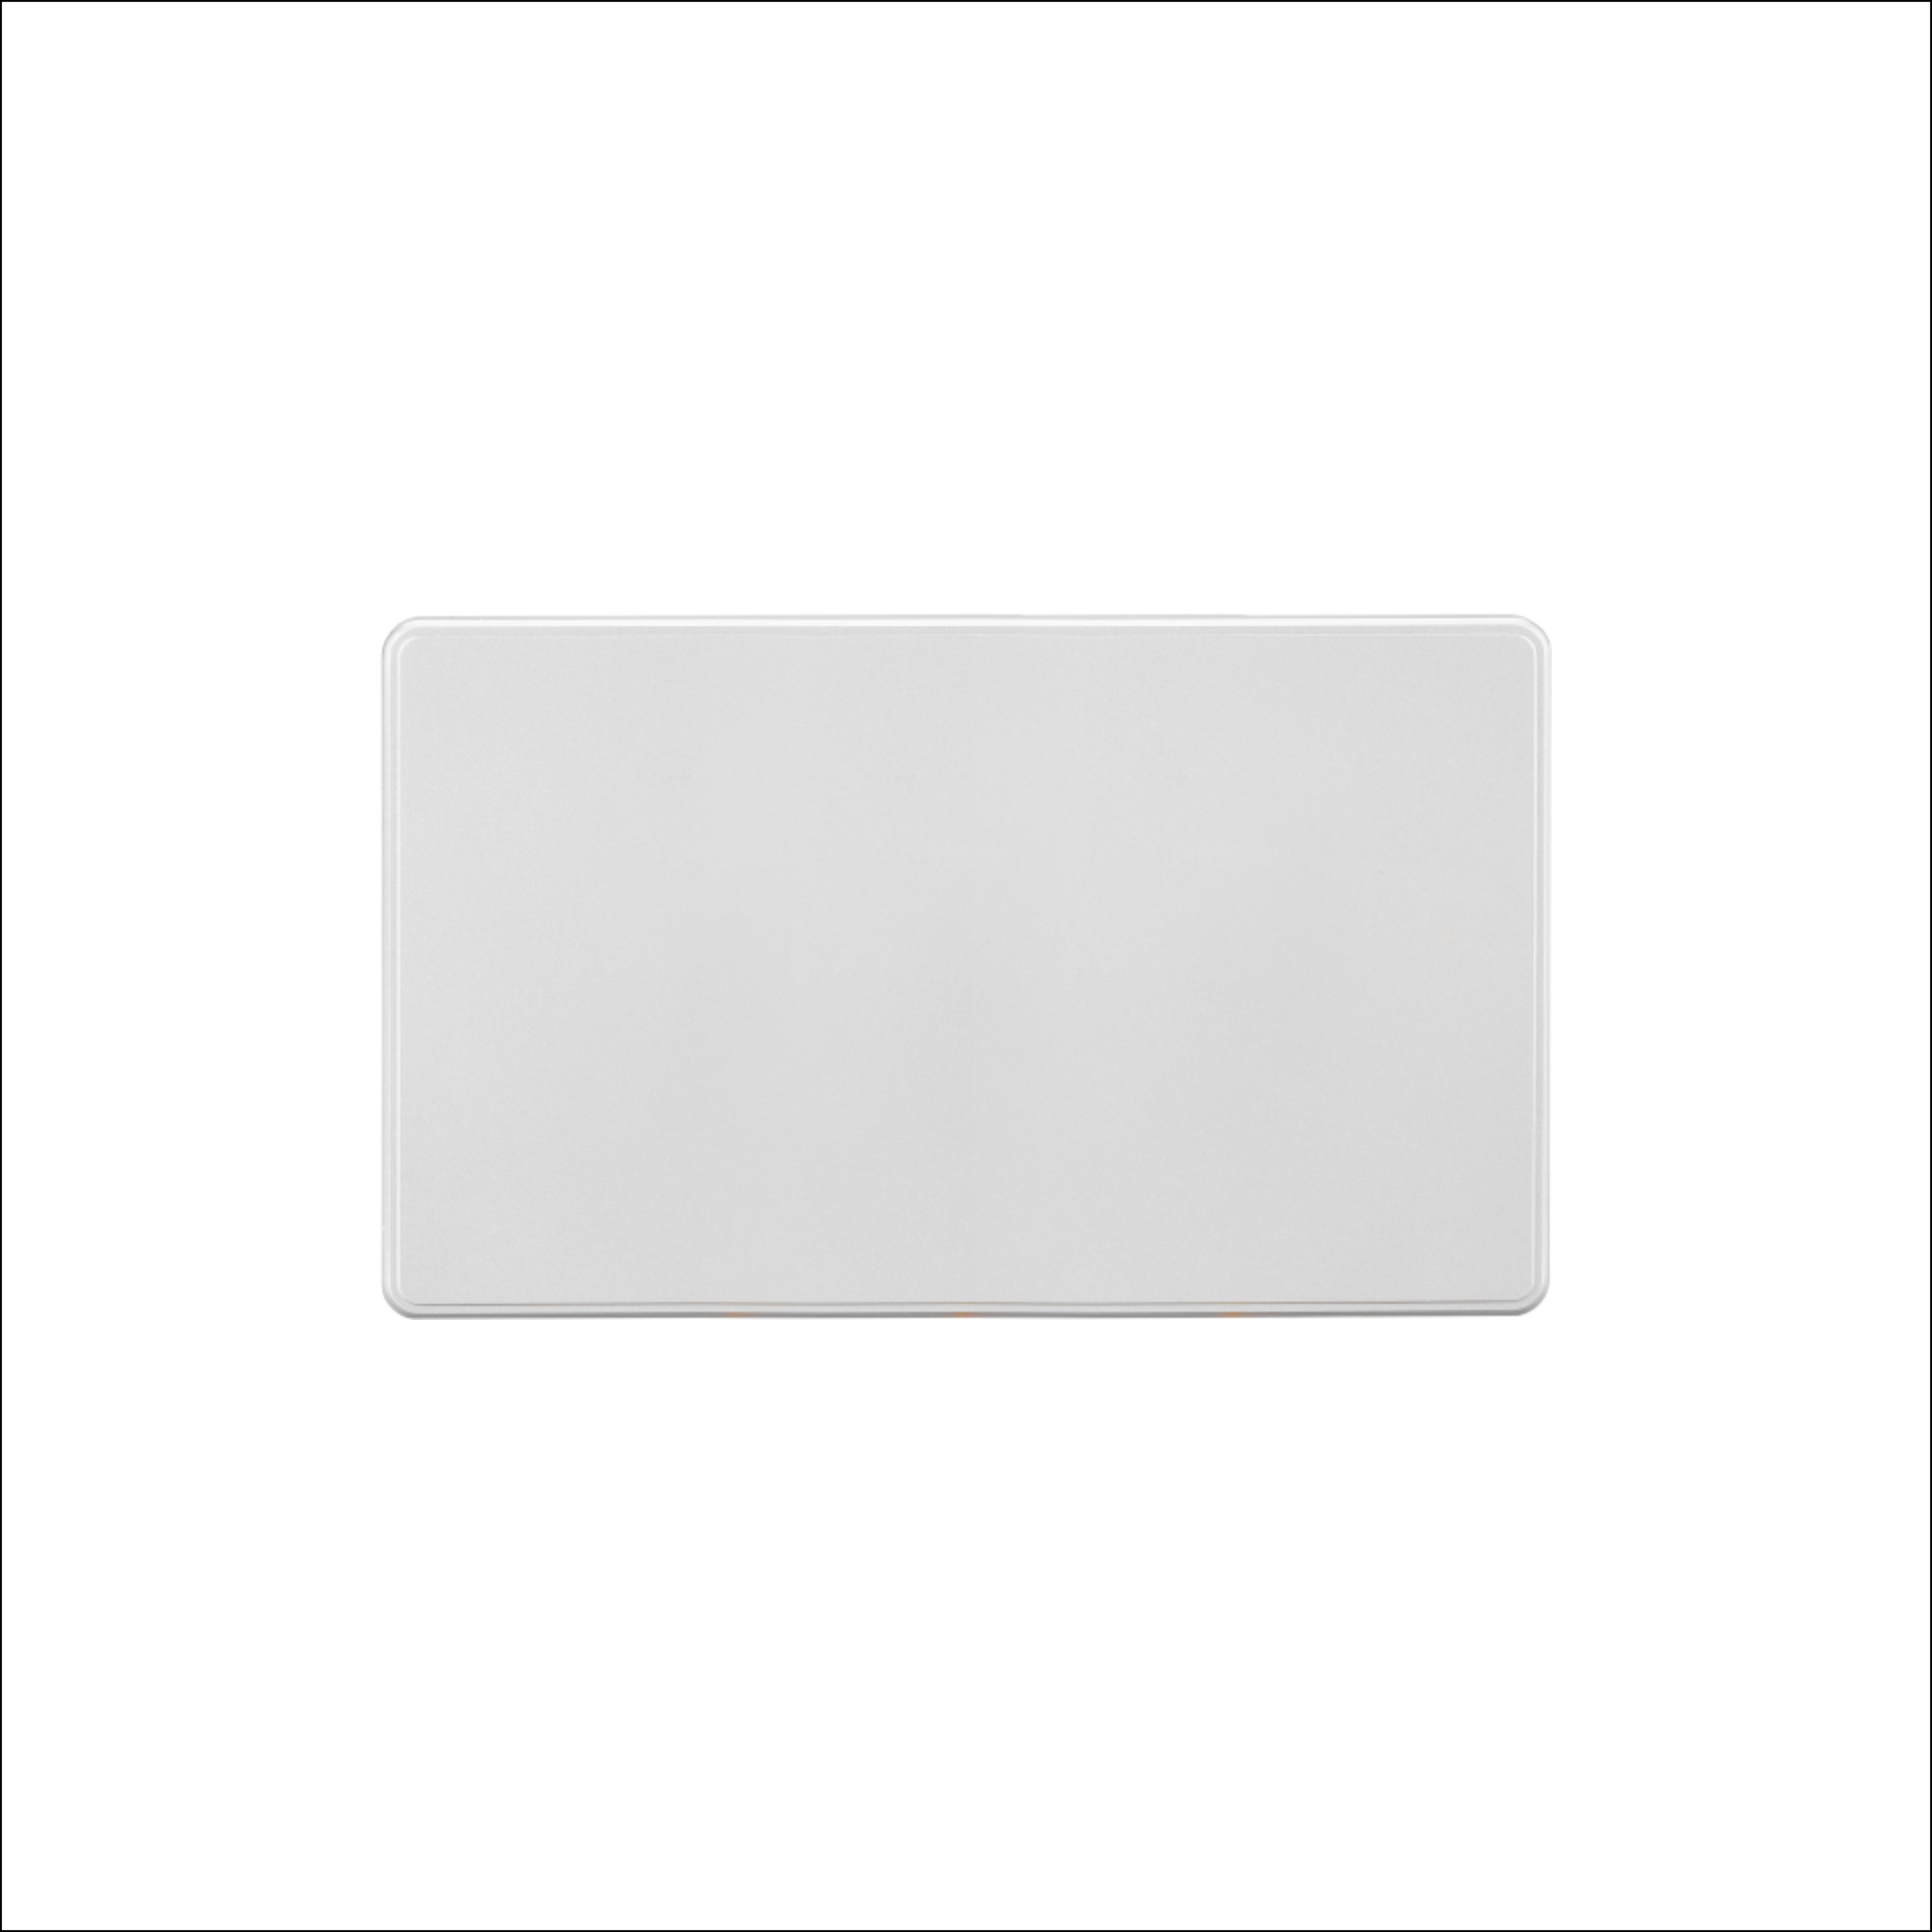 Big blank plate Featured Image